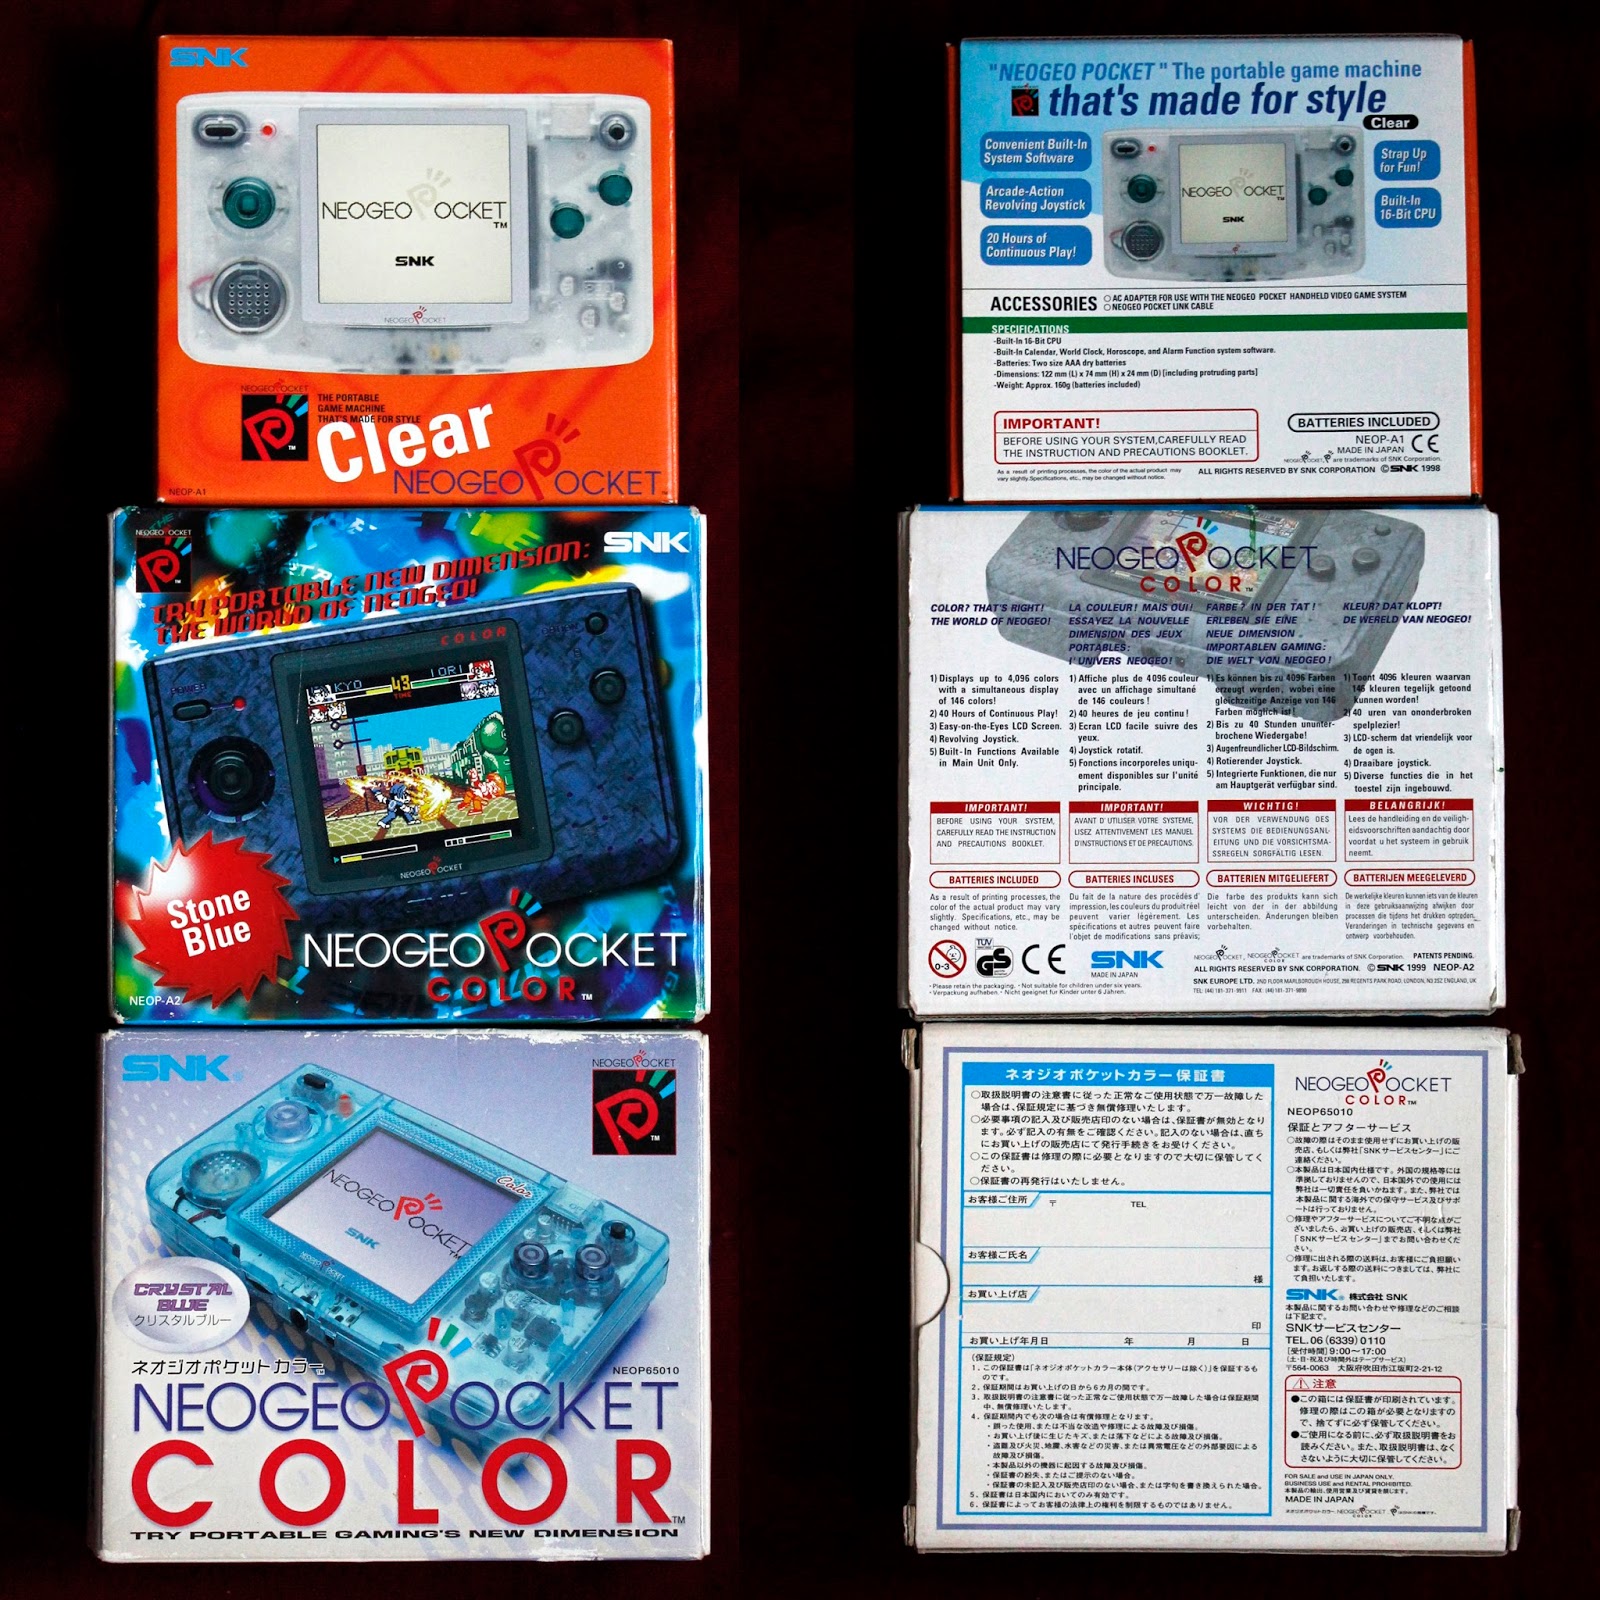 Love Without Anger: Neo Geo Pocket Comparison: B&W / Color / 'New' Slim